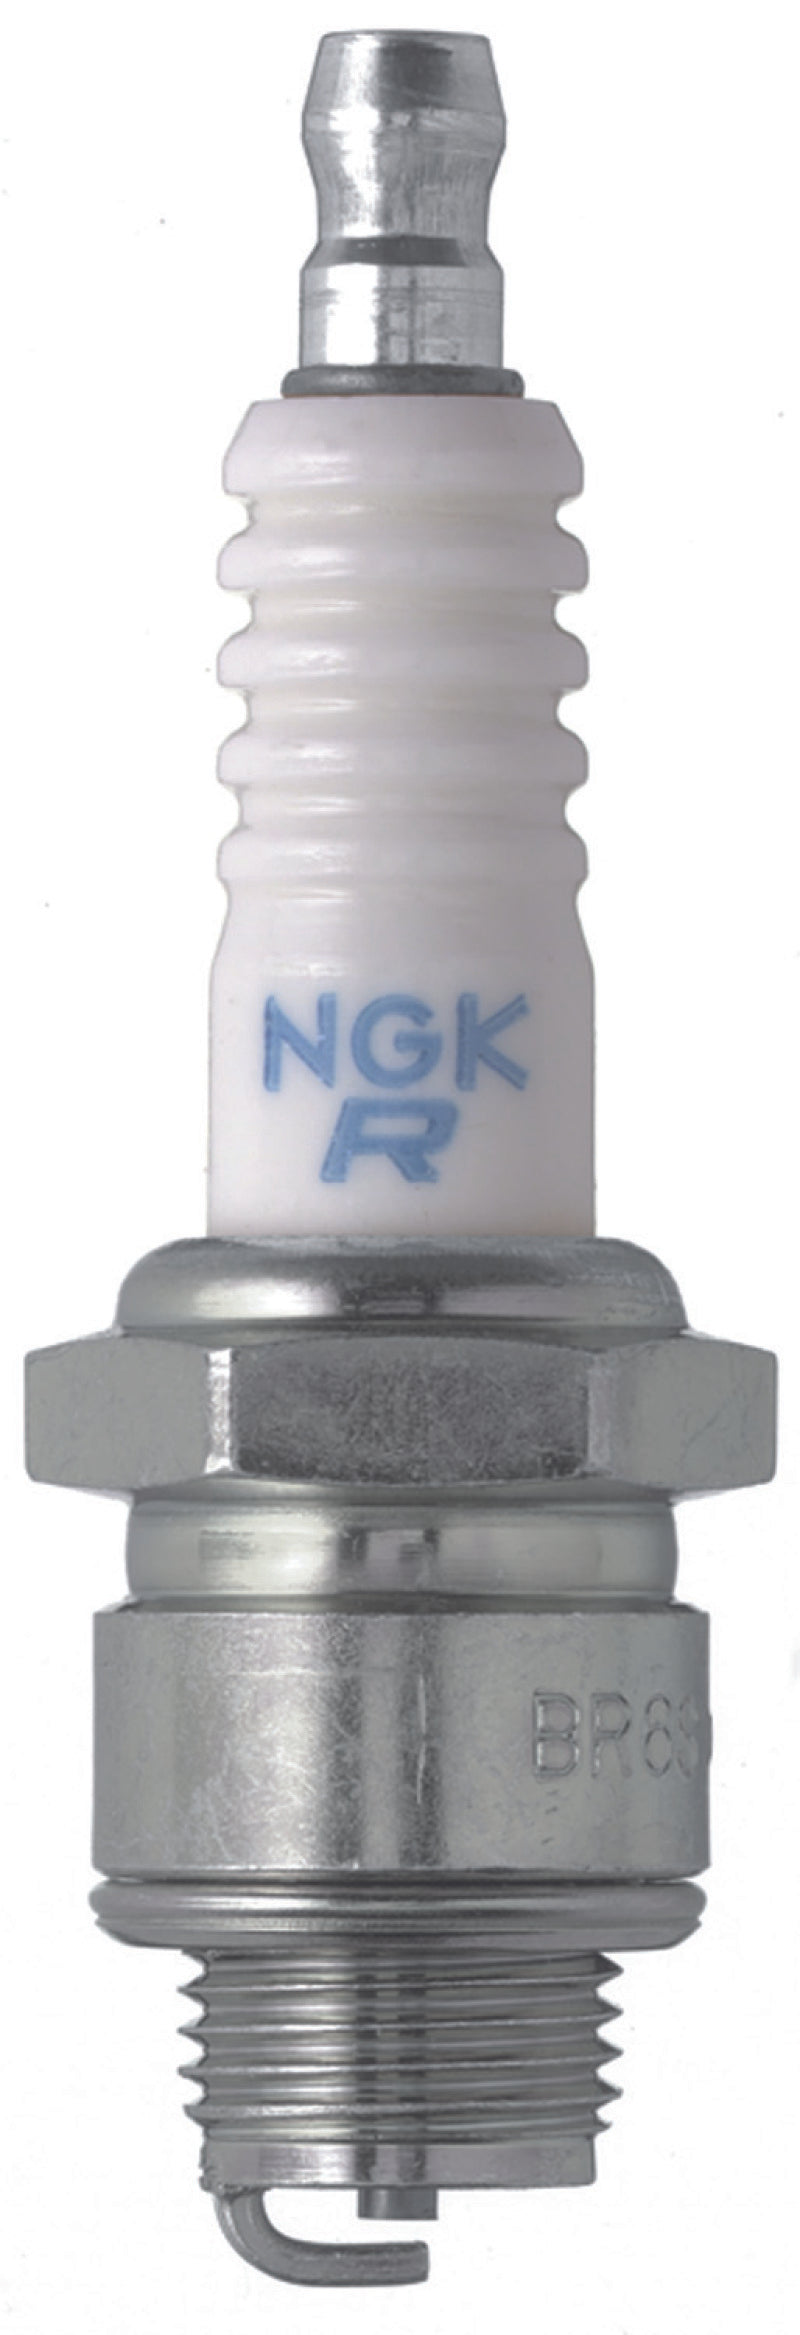 NGK Copper Core Spark Plug Box of 10 (BR6S)